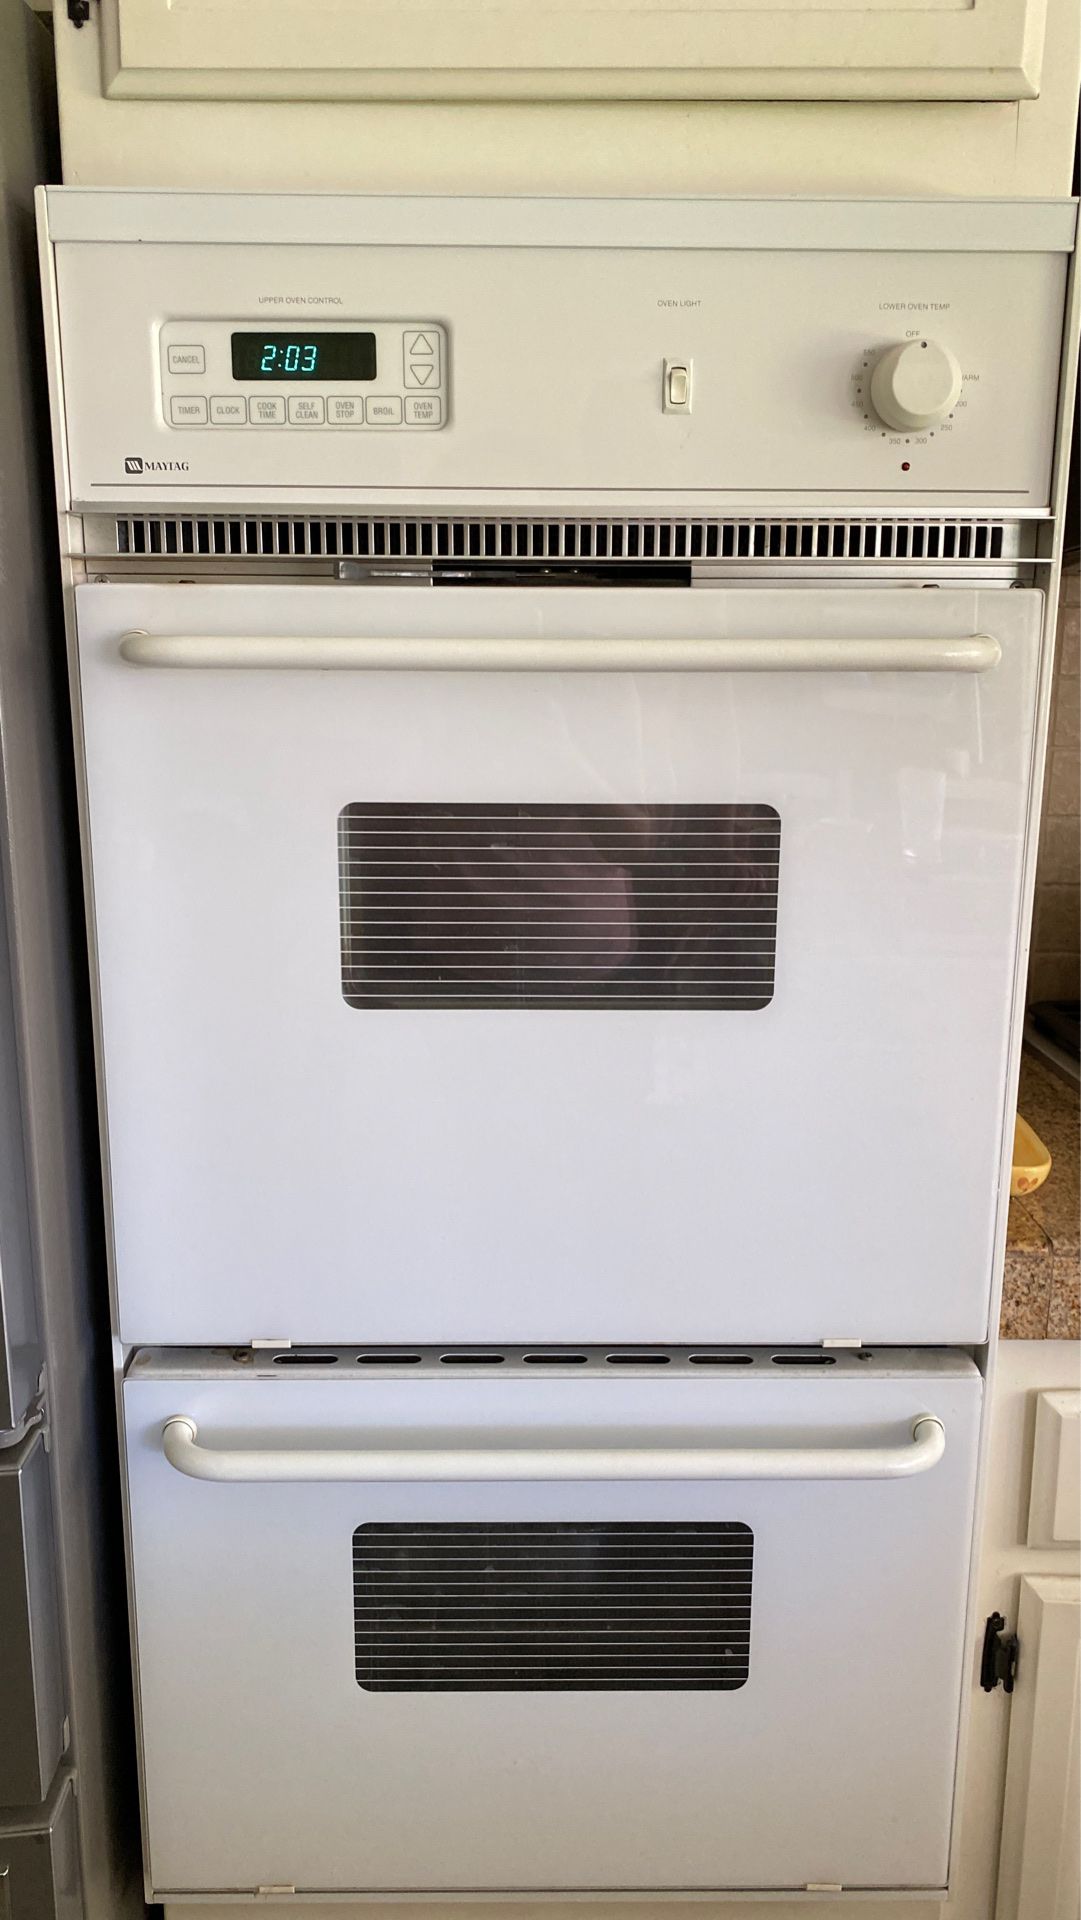 Must sell ASAP! Maytag electric double wall oven 24” wide in white